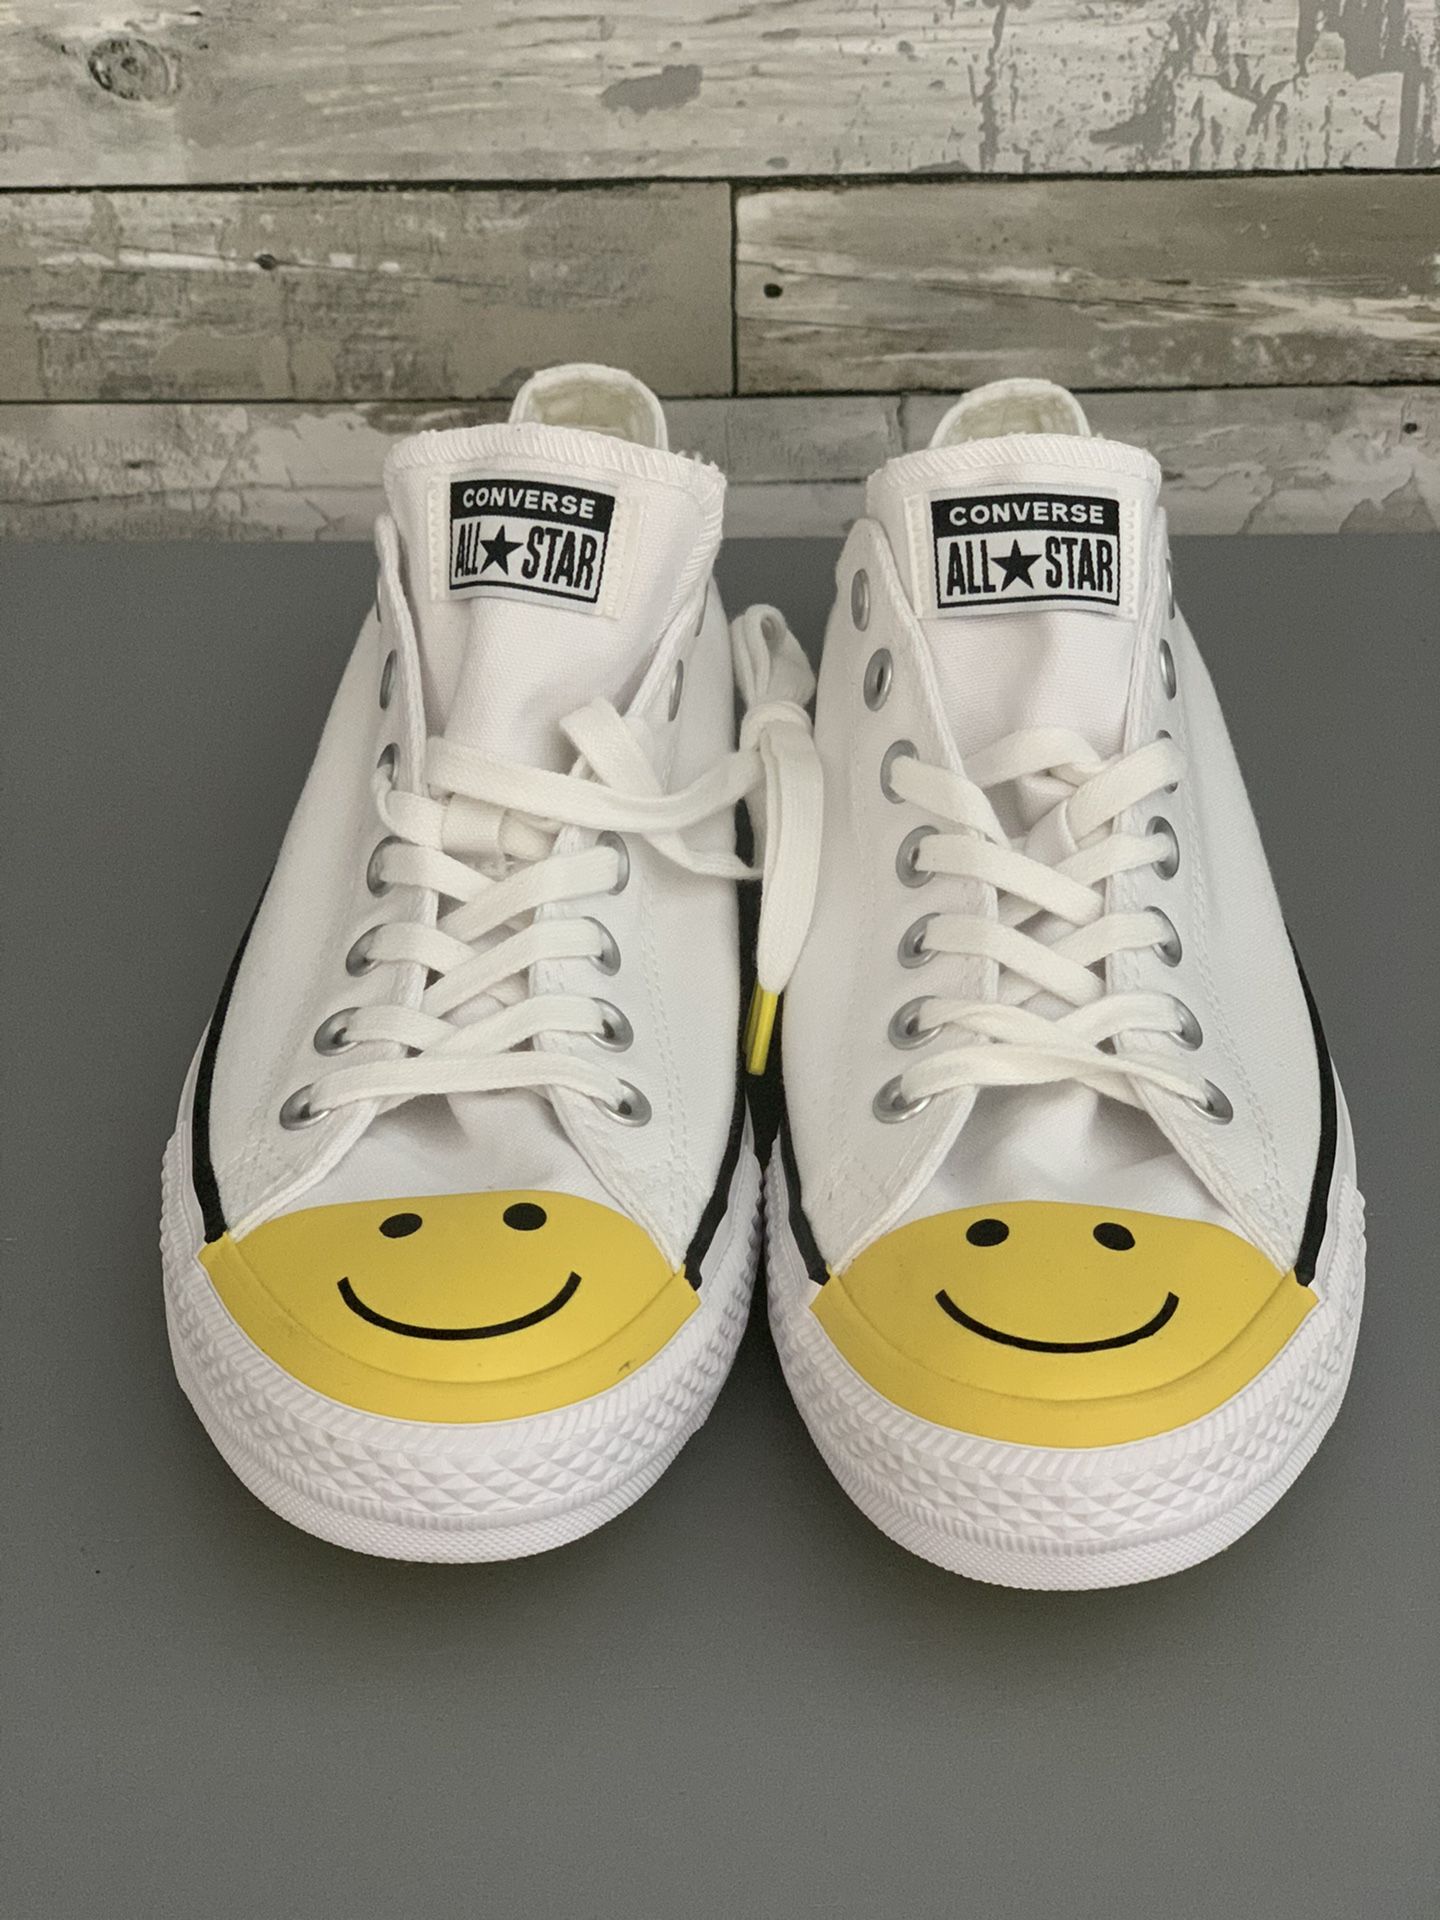 New Converse all star smiley face white size 10